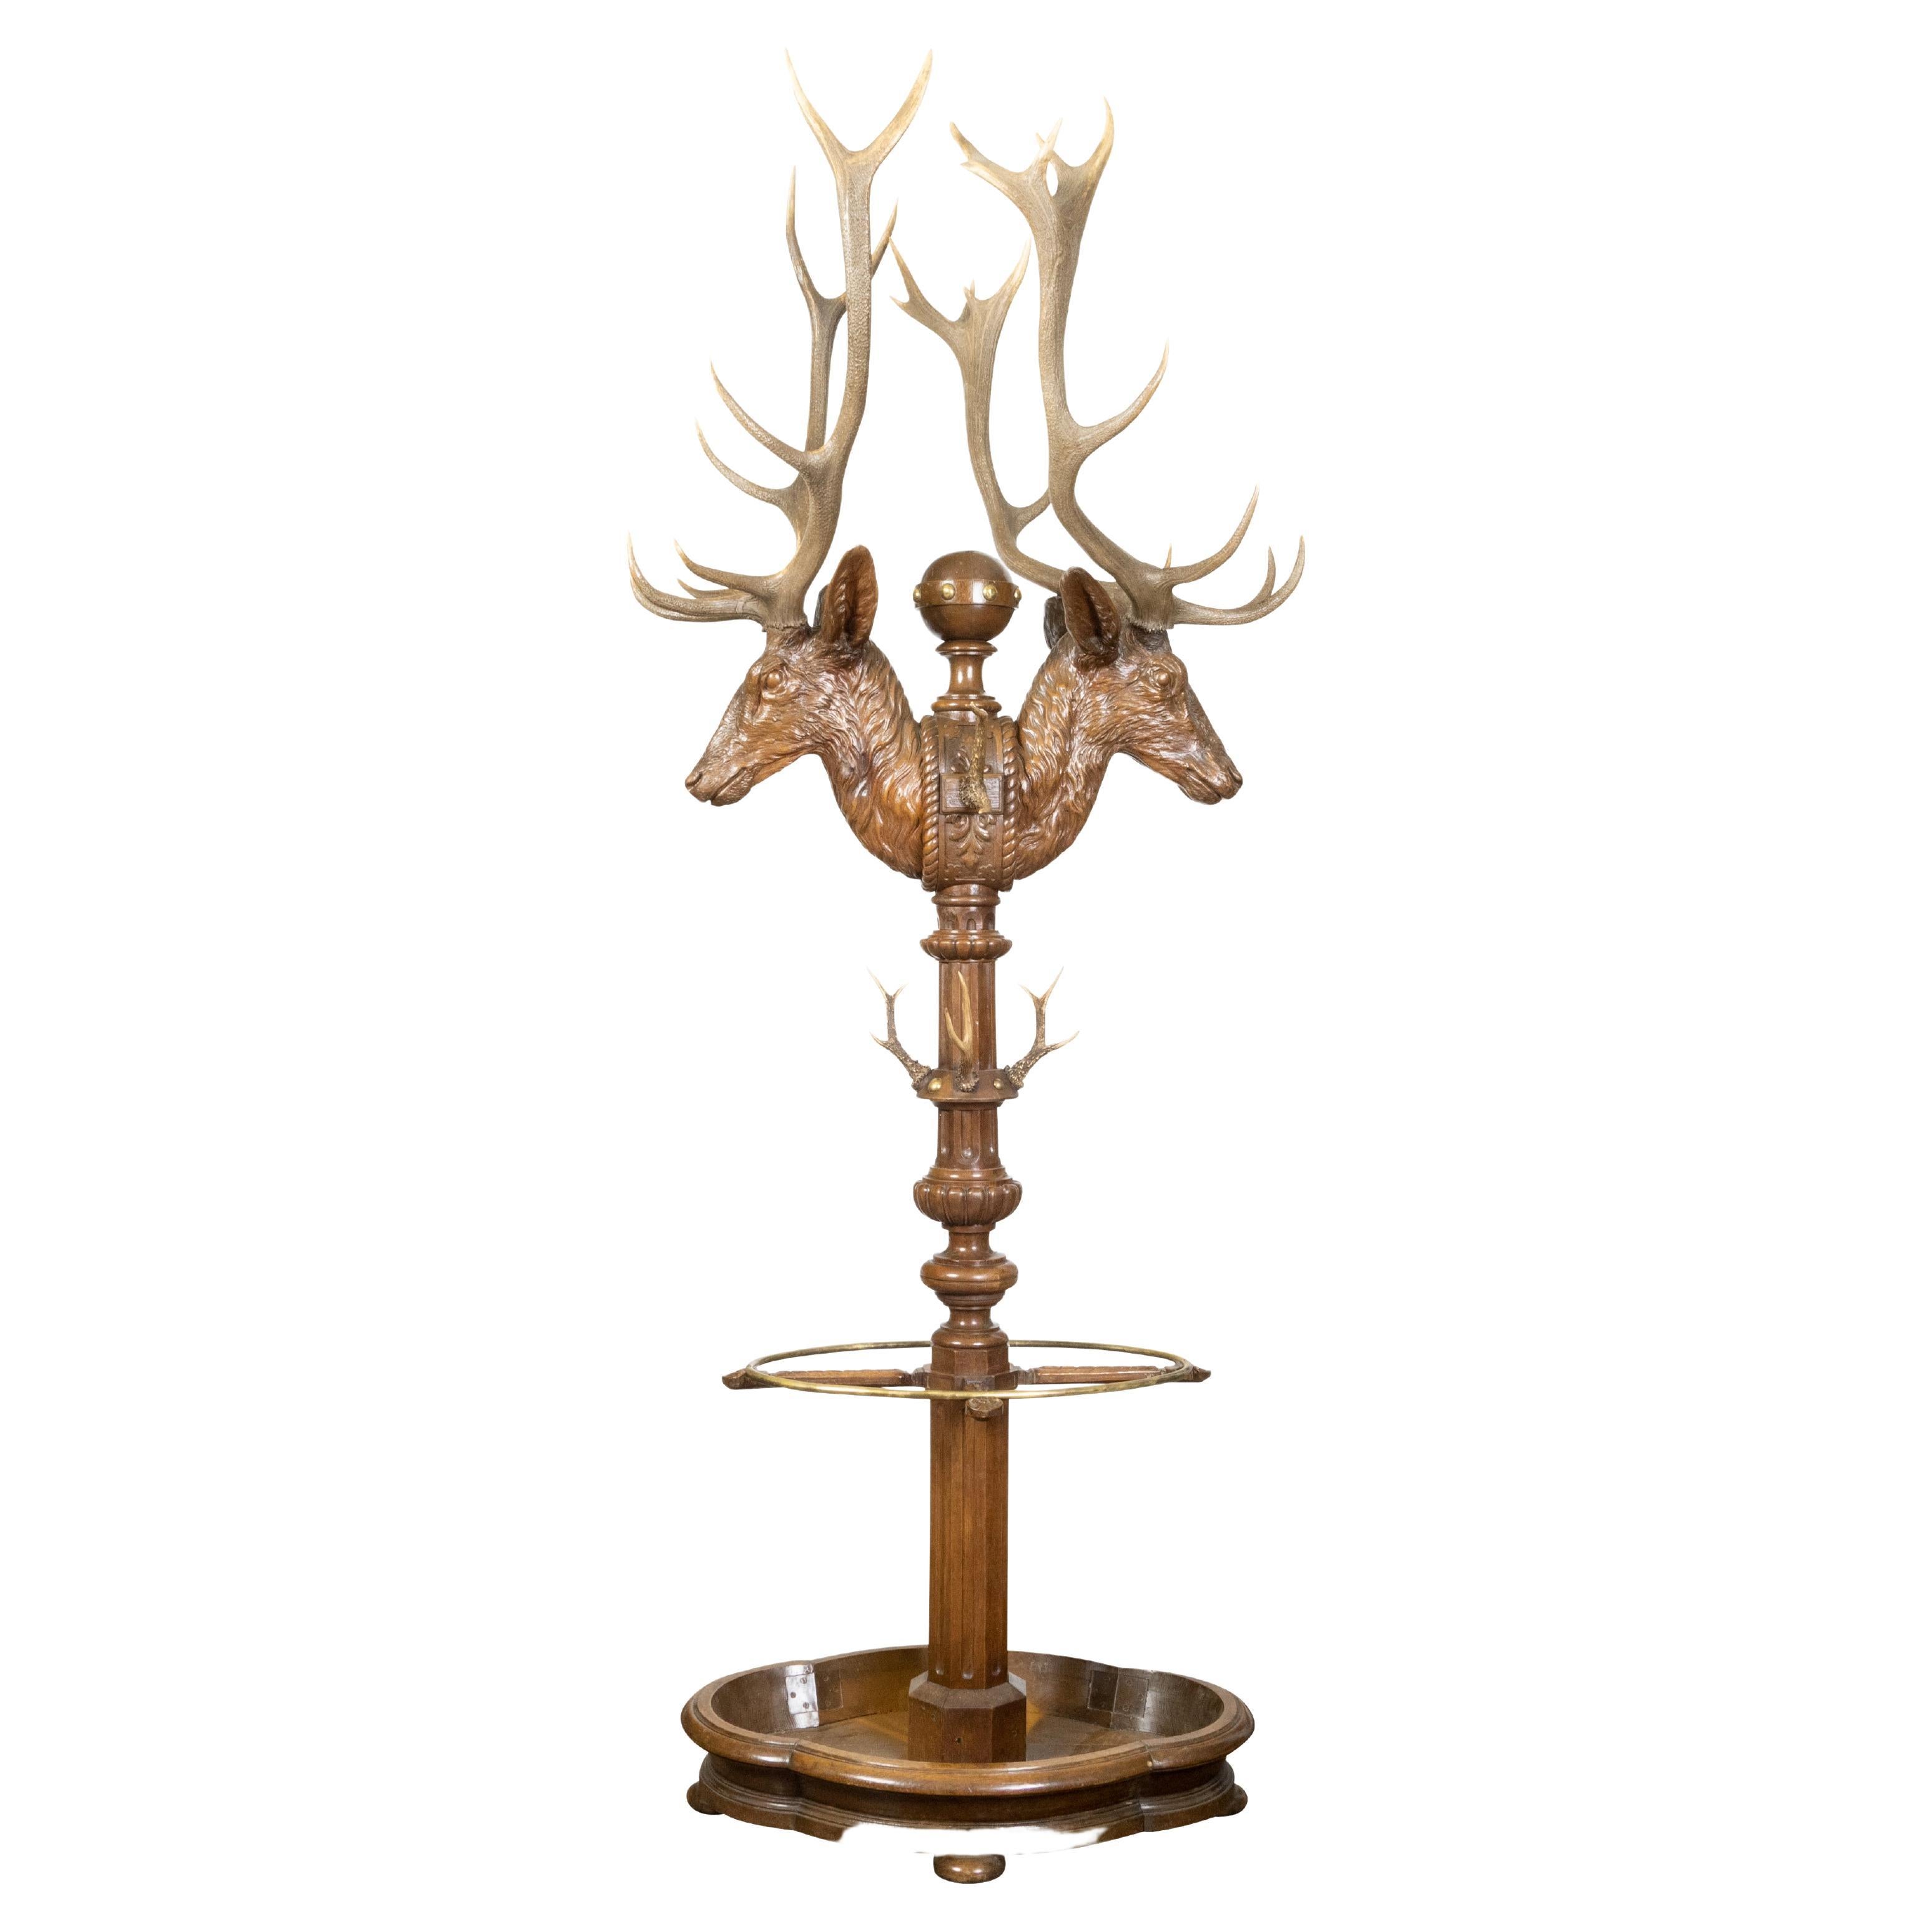 A black forest oversized carved oak coat and hat rack from the 19th century depicting stags with antlers and umbrella stand. Created during the 19th century, this stunning black forest rack captures our attention with its oversized proportions and